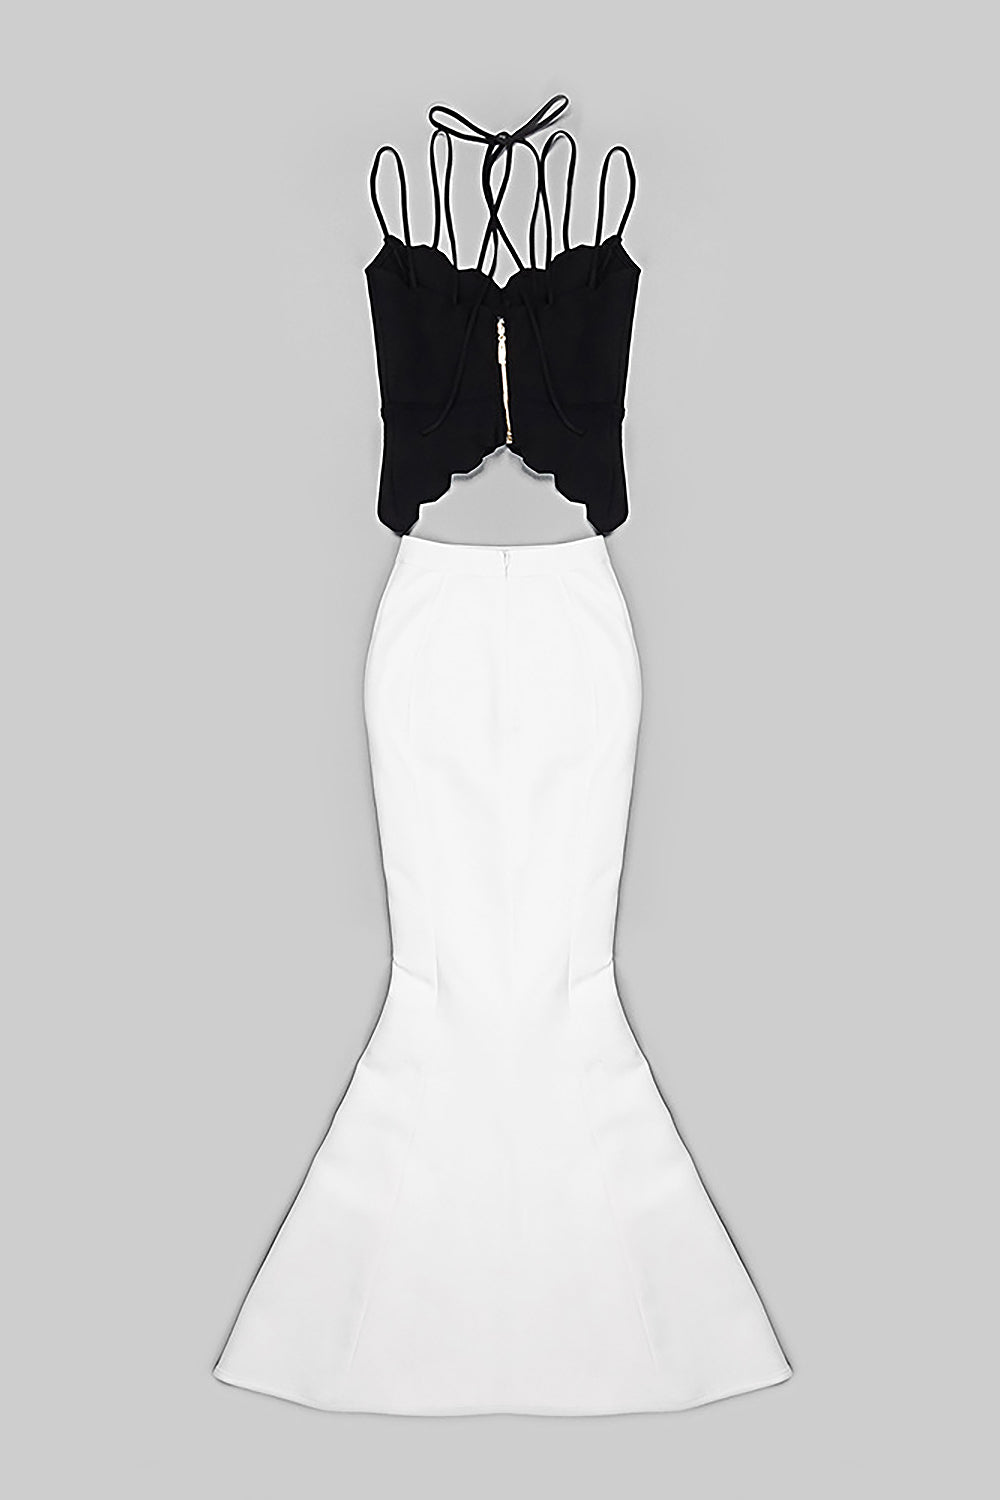 Black White Repe Cut-out Mermaid Bandage Gown